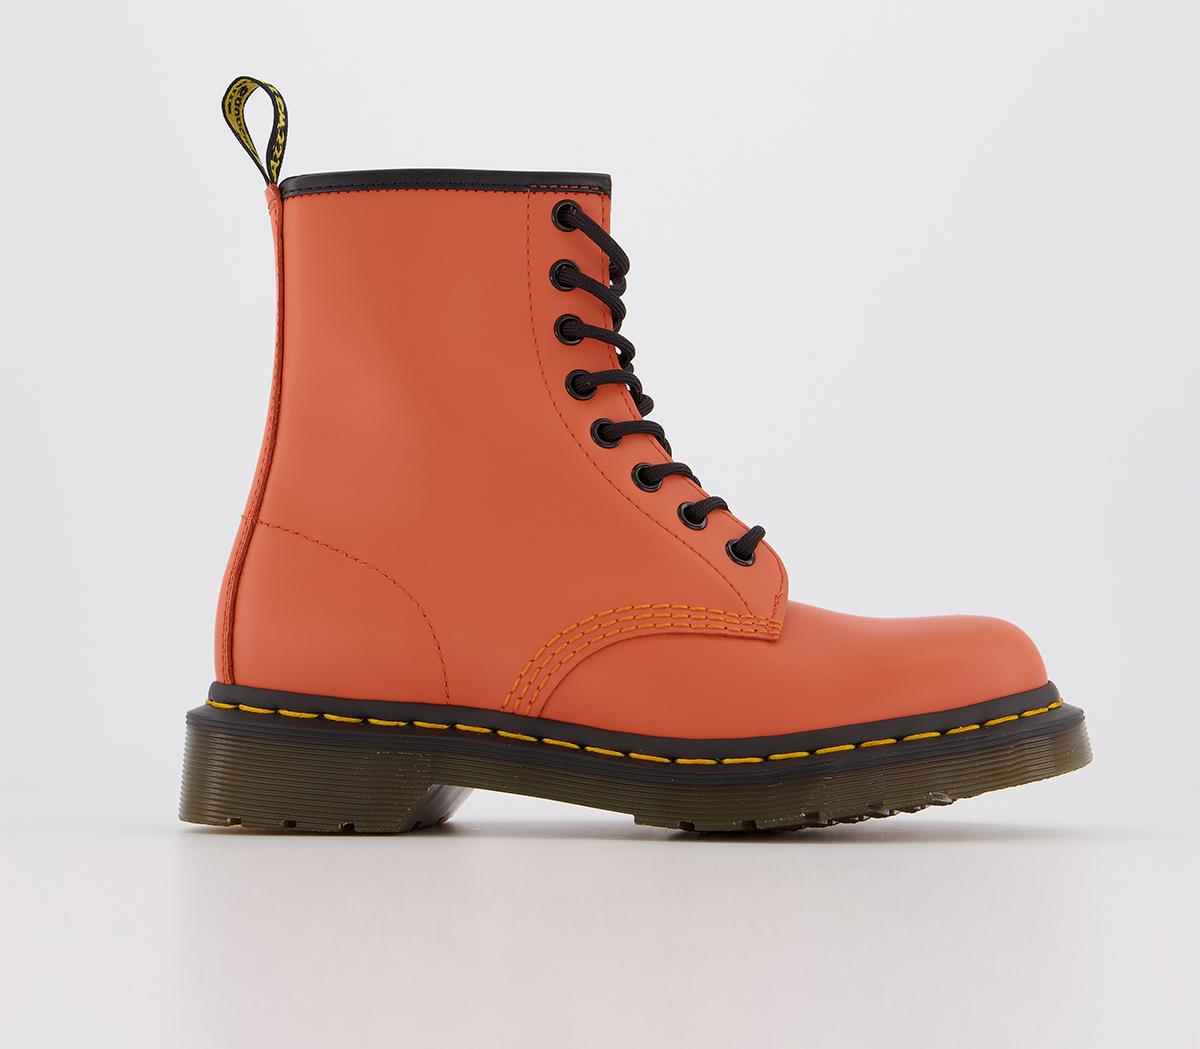 Dr. Martens 8 Eyelet Lace Up Boots Orange Smooth - Women's Ankle Boots